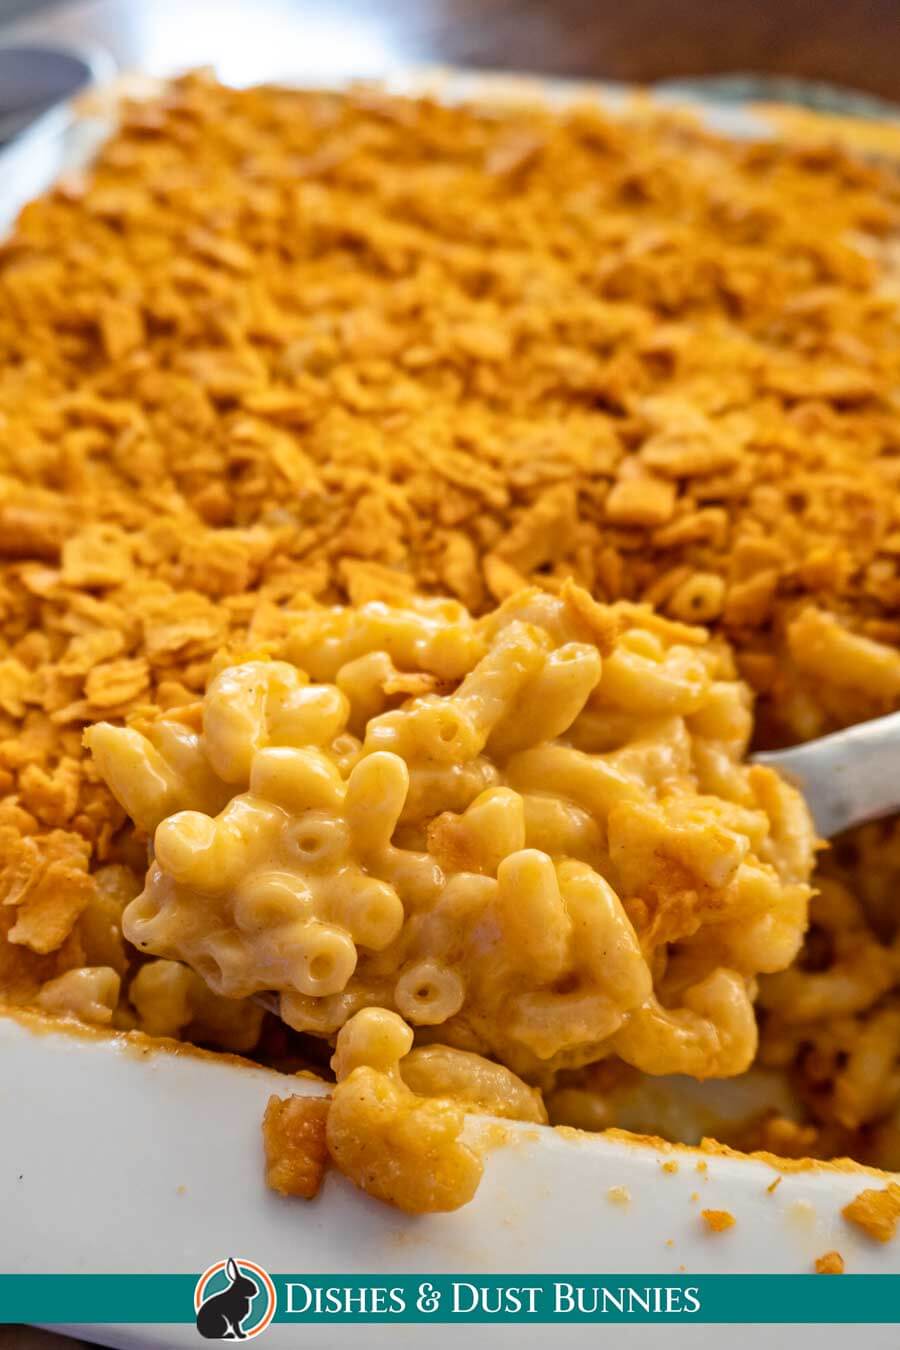 Classic Homemade Baked Mac and Cheese